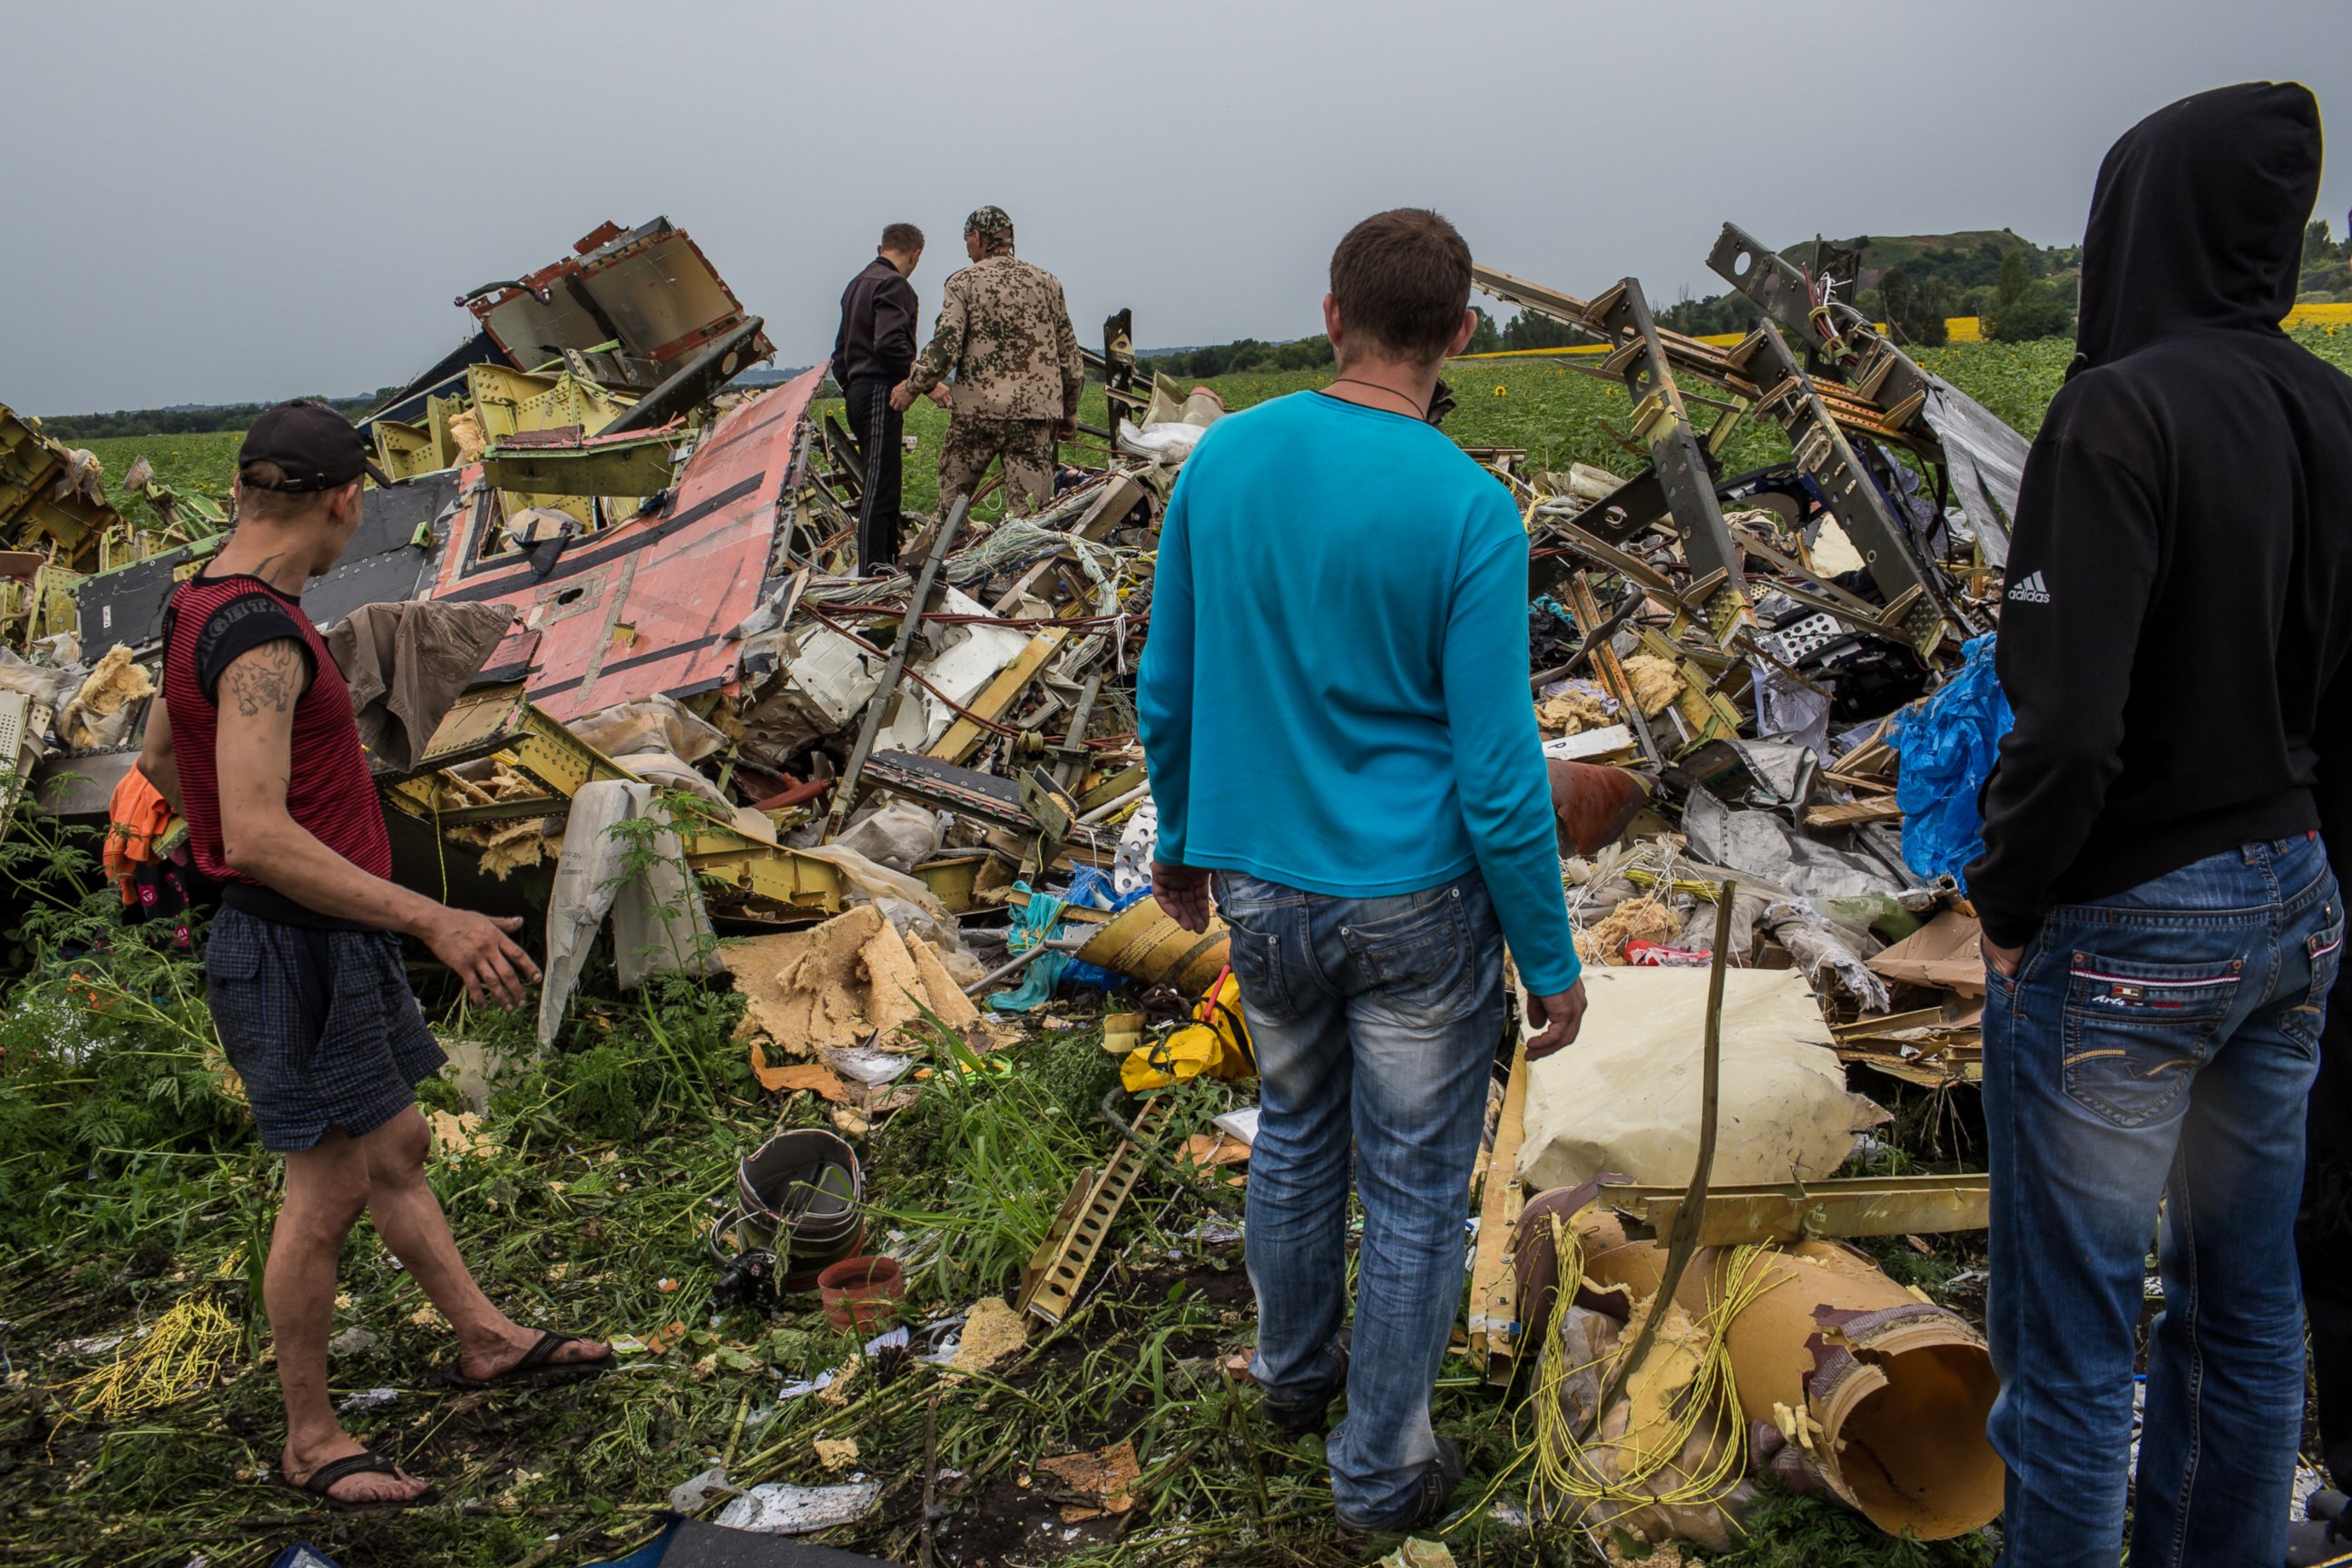 PHOTO: A group of people are pictured looking at the wreckage of Malaysia Airlines Flight 17 on July 18, 2014 in Grabovka, Ukraine.
